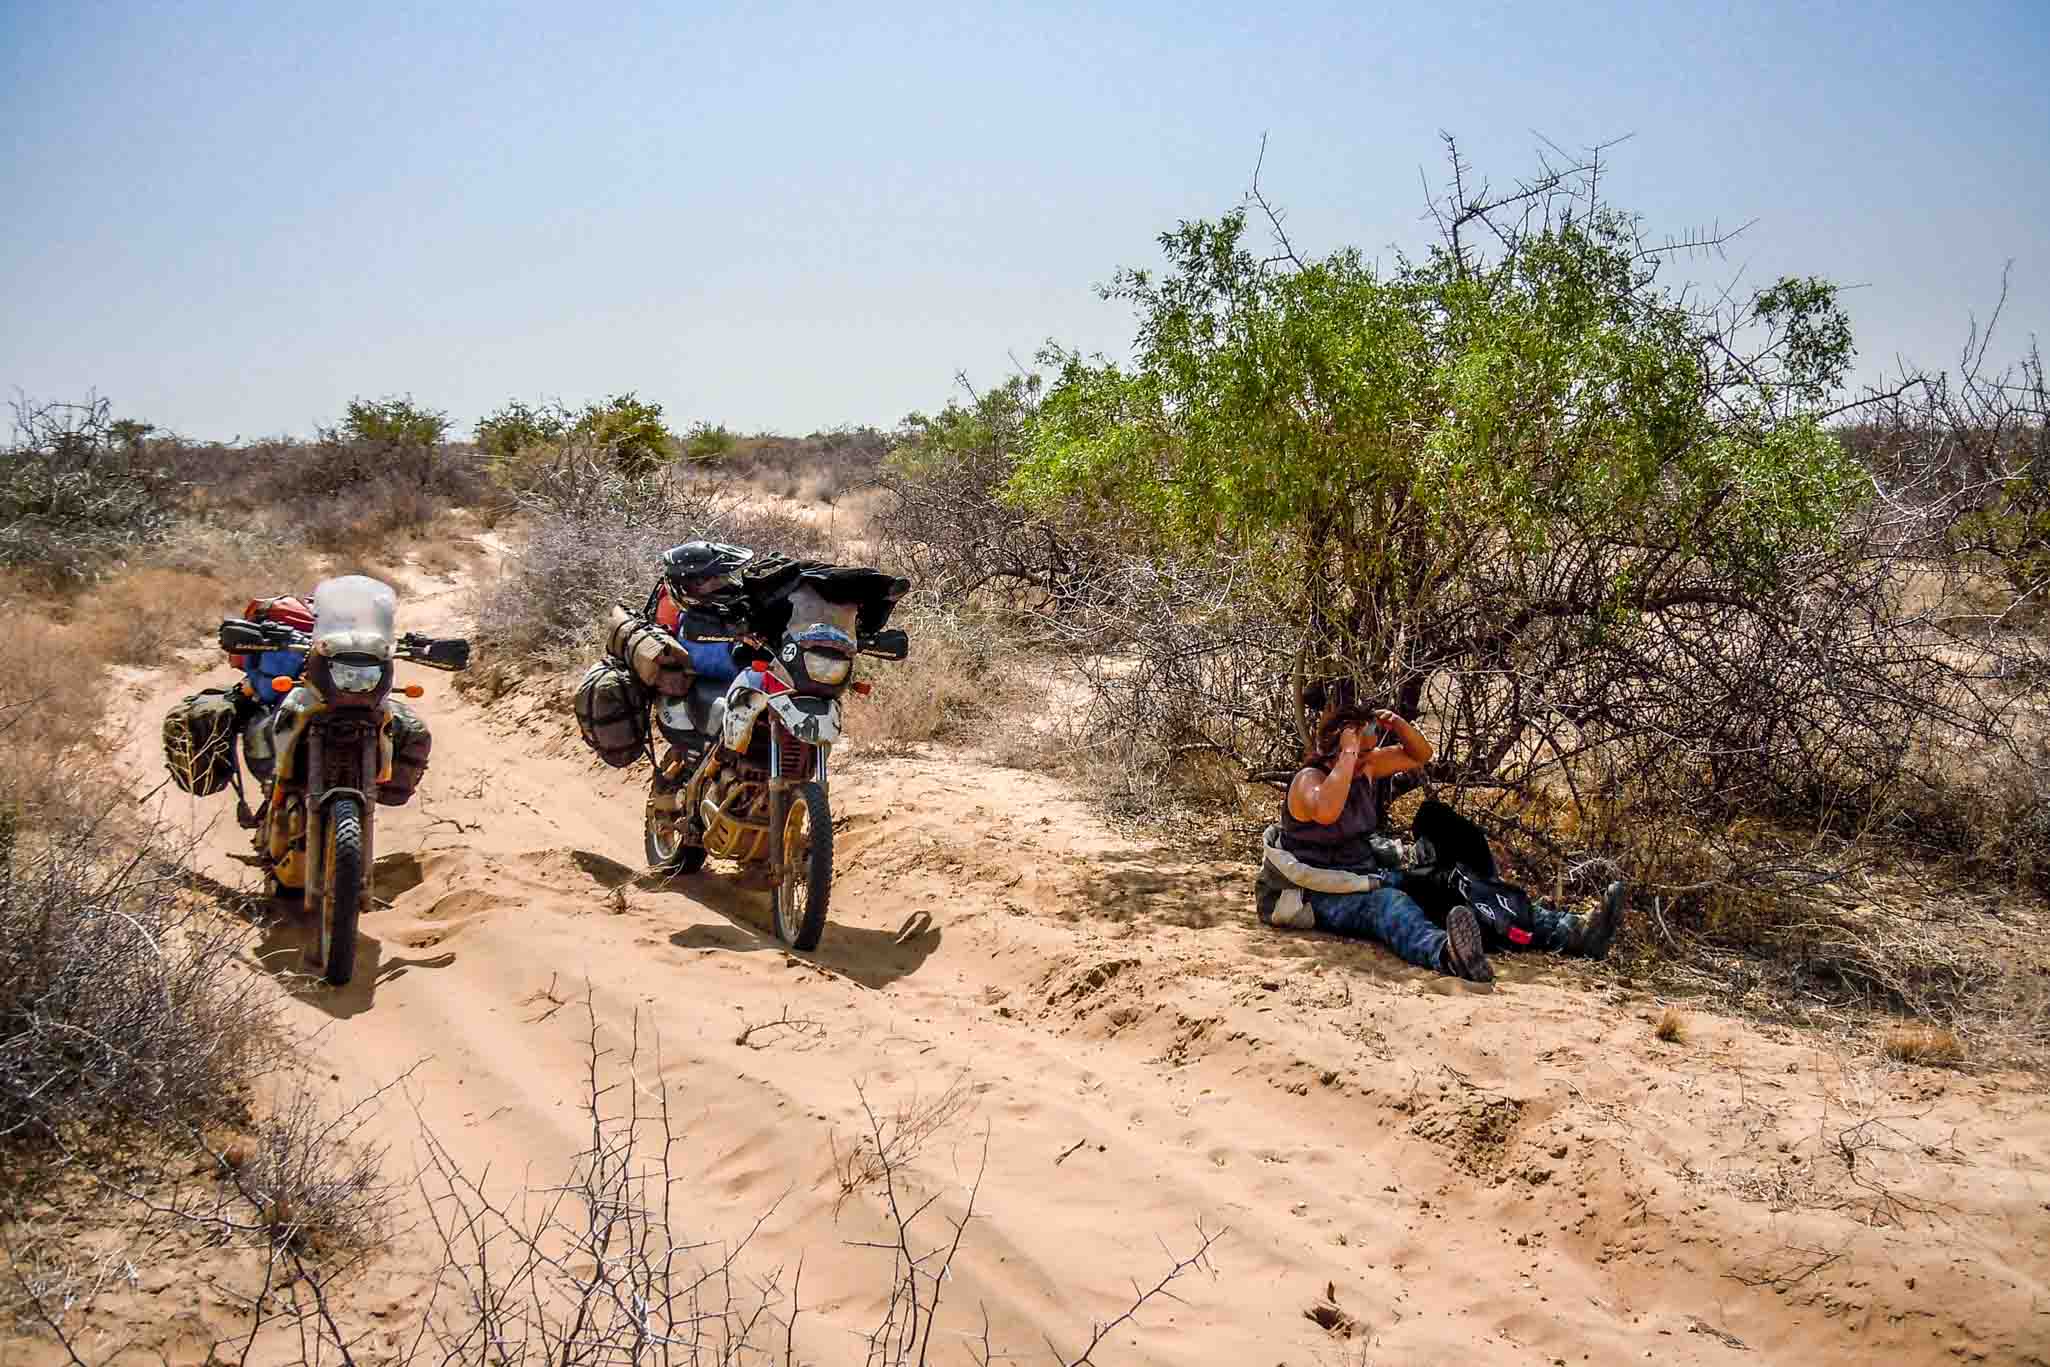 Skills riding sand, volcanic rock and extreme heat is but some of the challanges